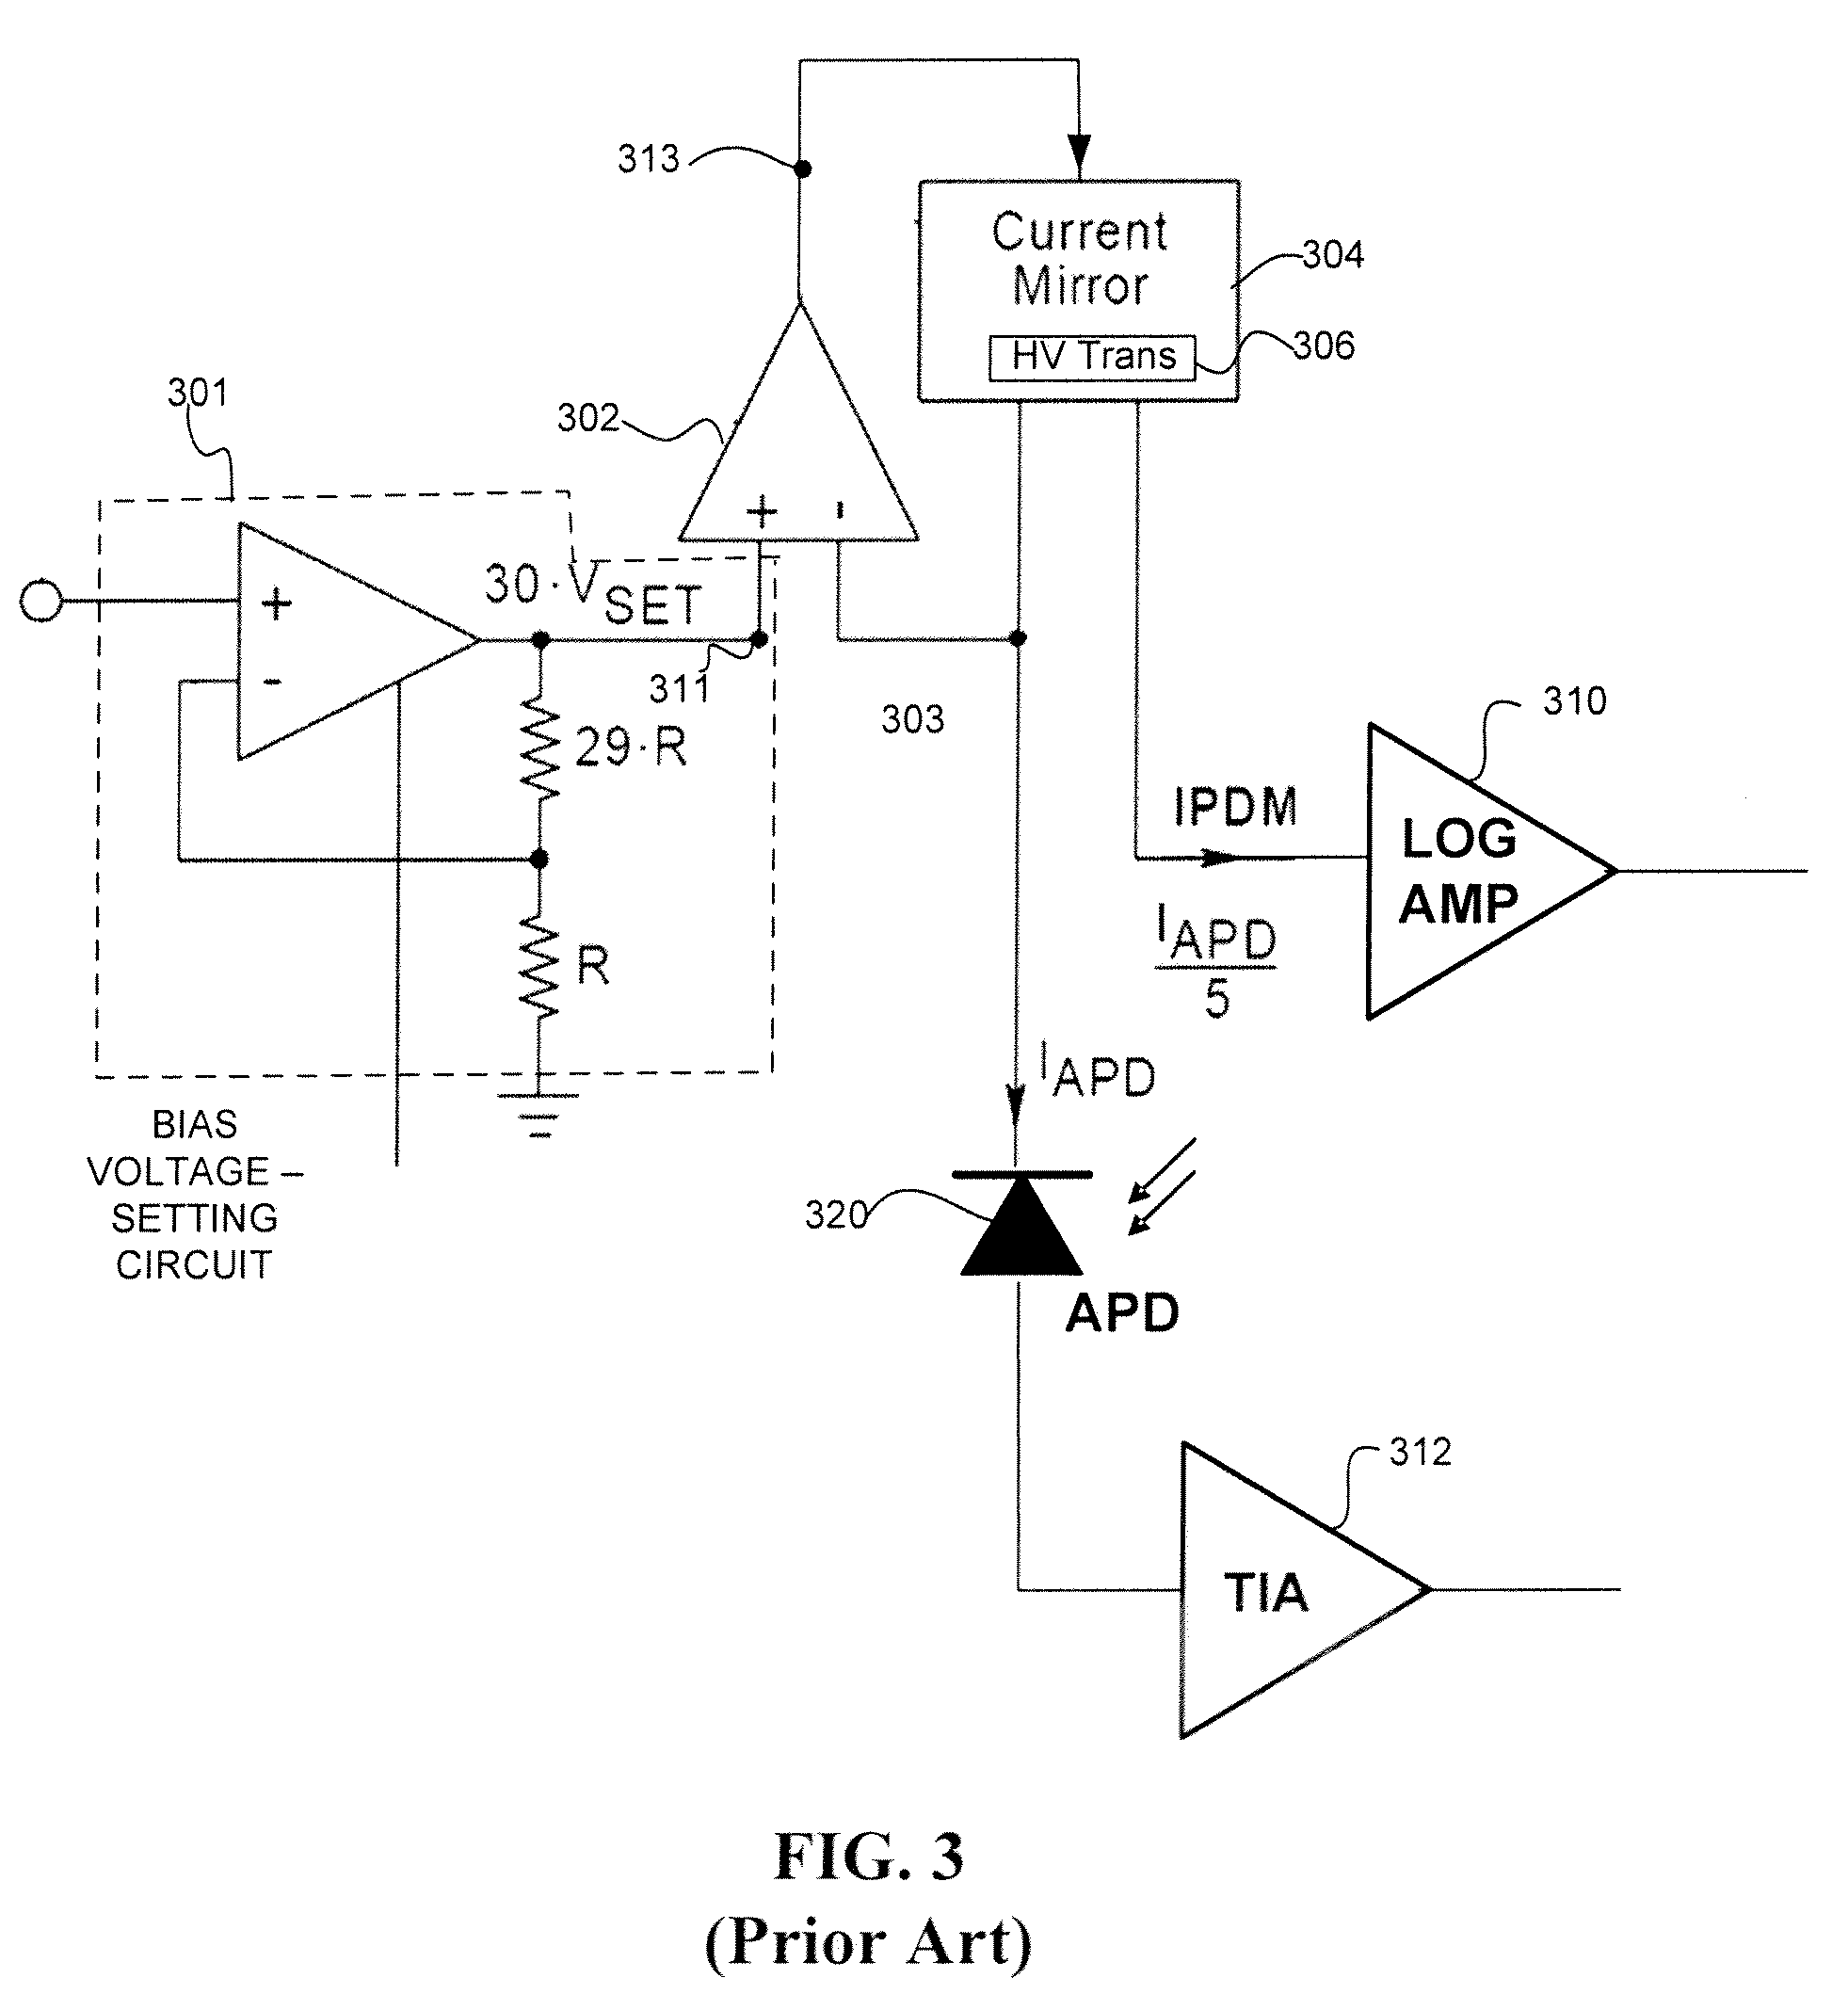 In-situ power monitor having an extended range to stabilize gain of avalanche photodiodes across temperature variations